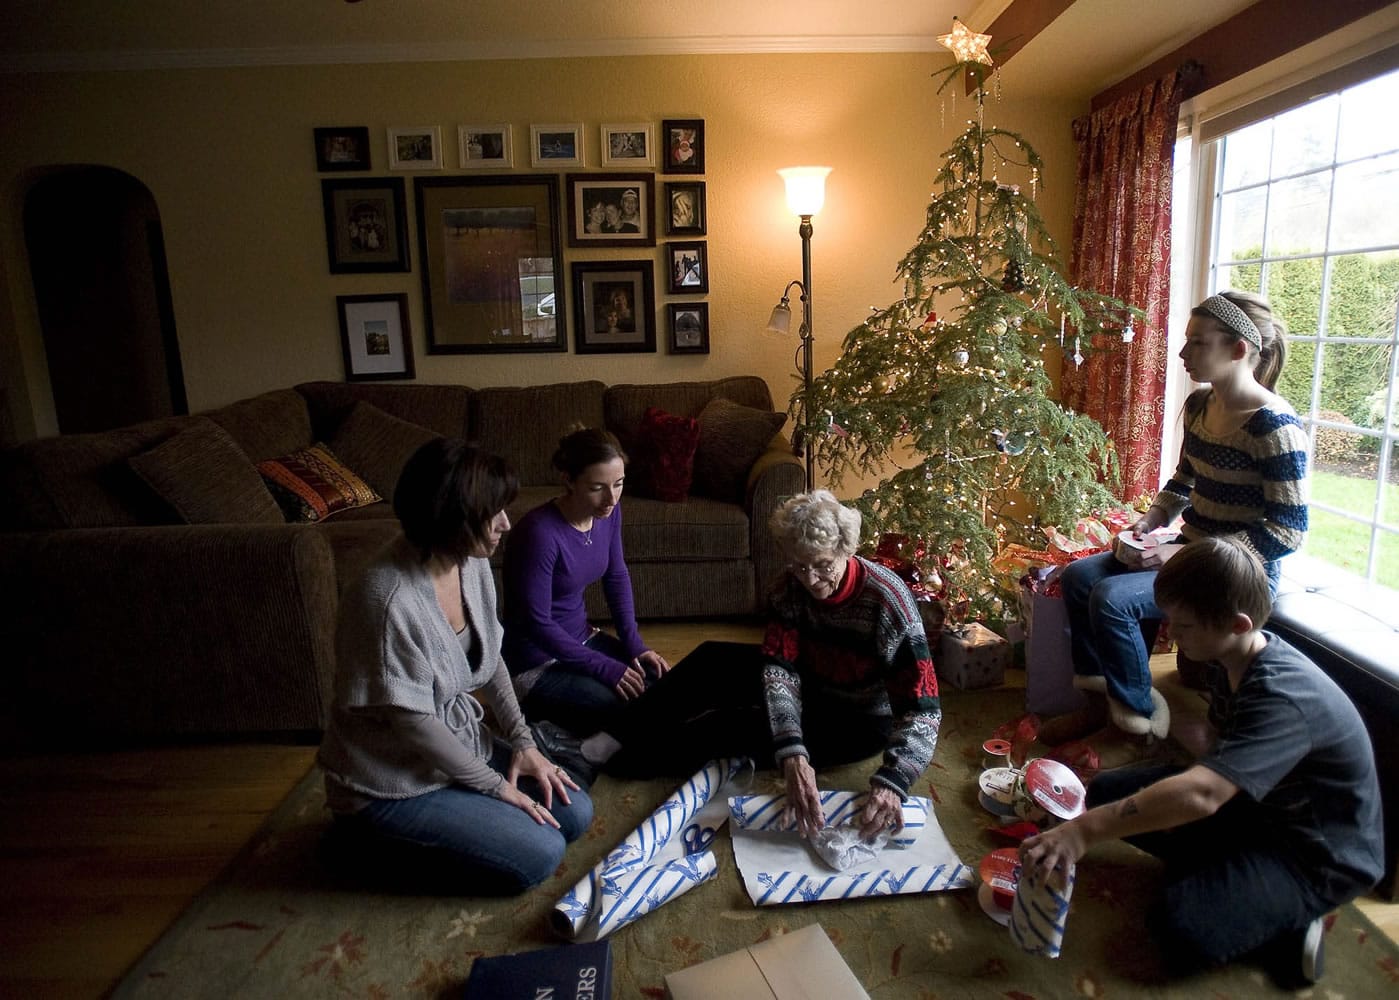 Barbara Joyce Olson, center, wraps gifts with her daughter Carla Munson, left, granddaughter Alaina Munson, second from left, and great-grandchildren Elle Munson, 13, by the window, and Ashton Munson, 11, right.